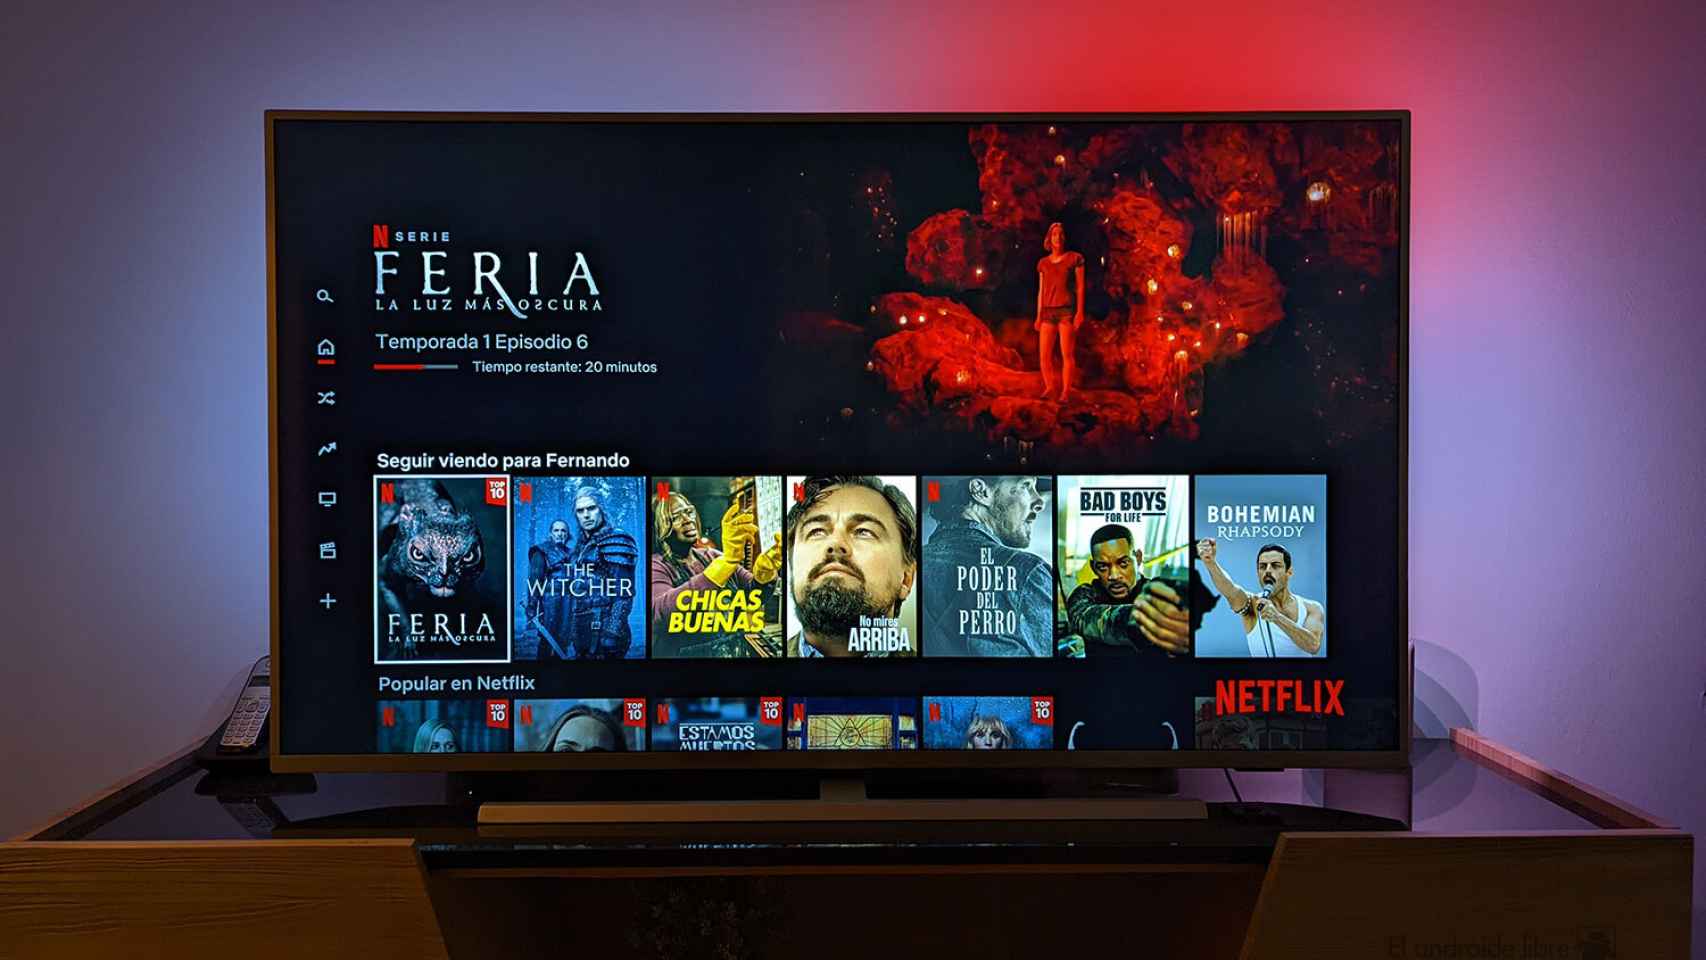 Boost Your Smart TV’s Internet Speed with This Simple Trick for Better Series and Movie Streaming